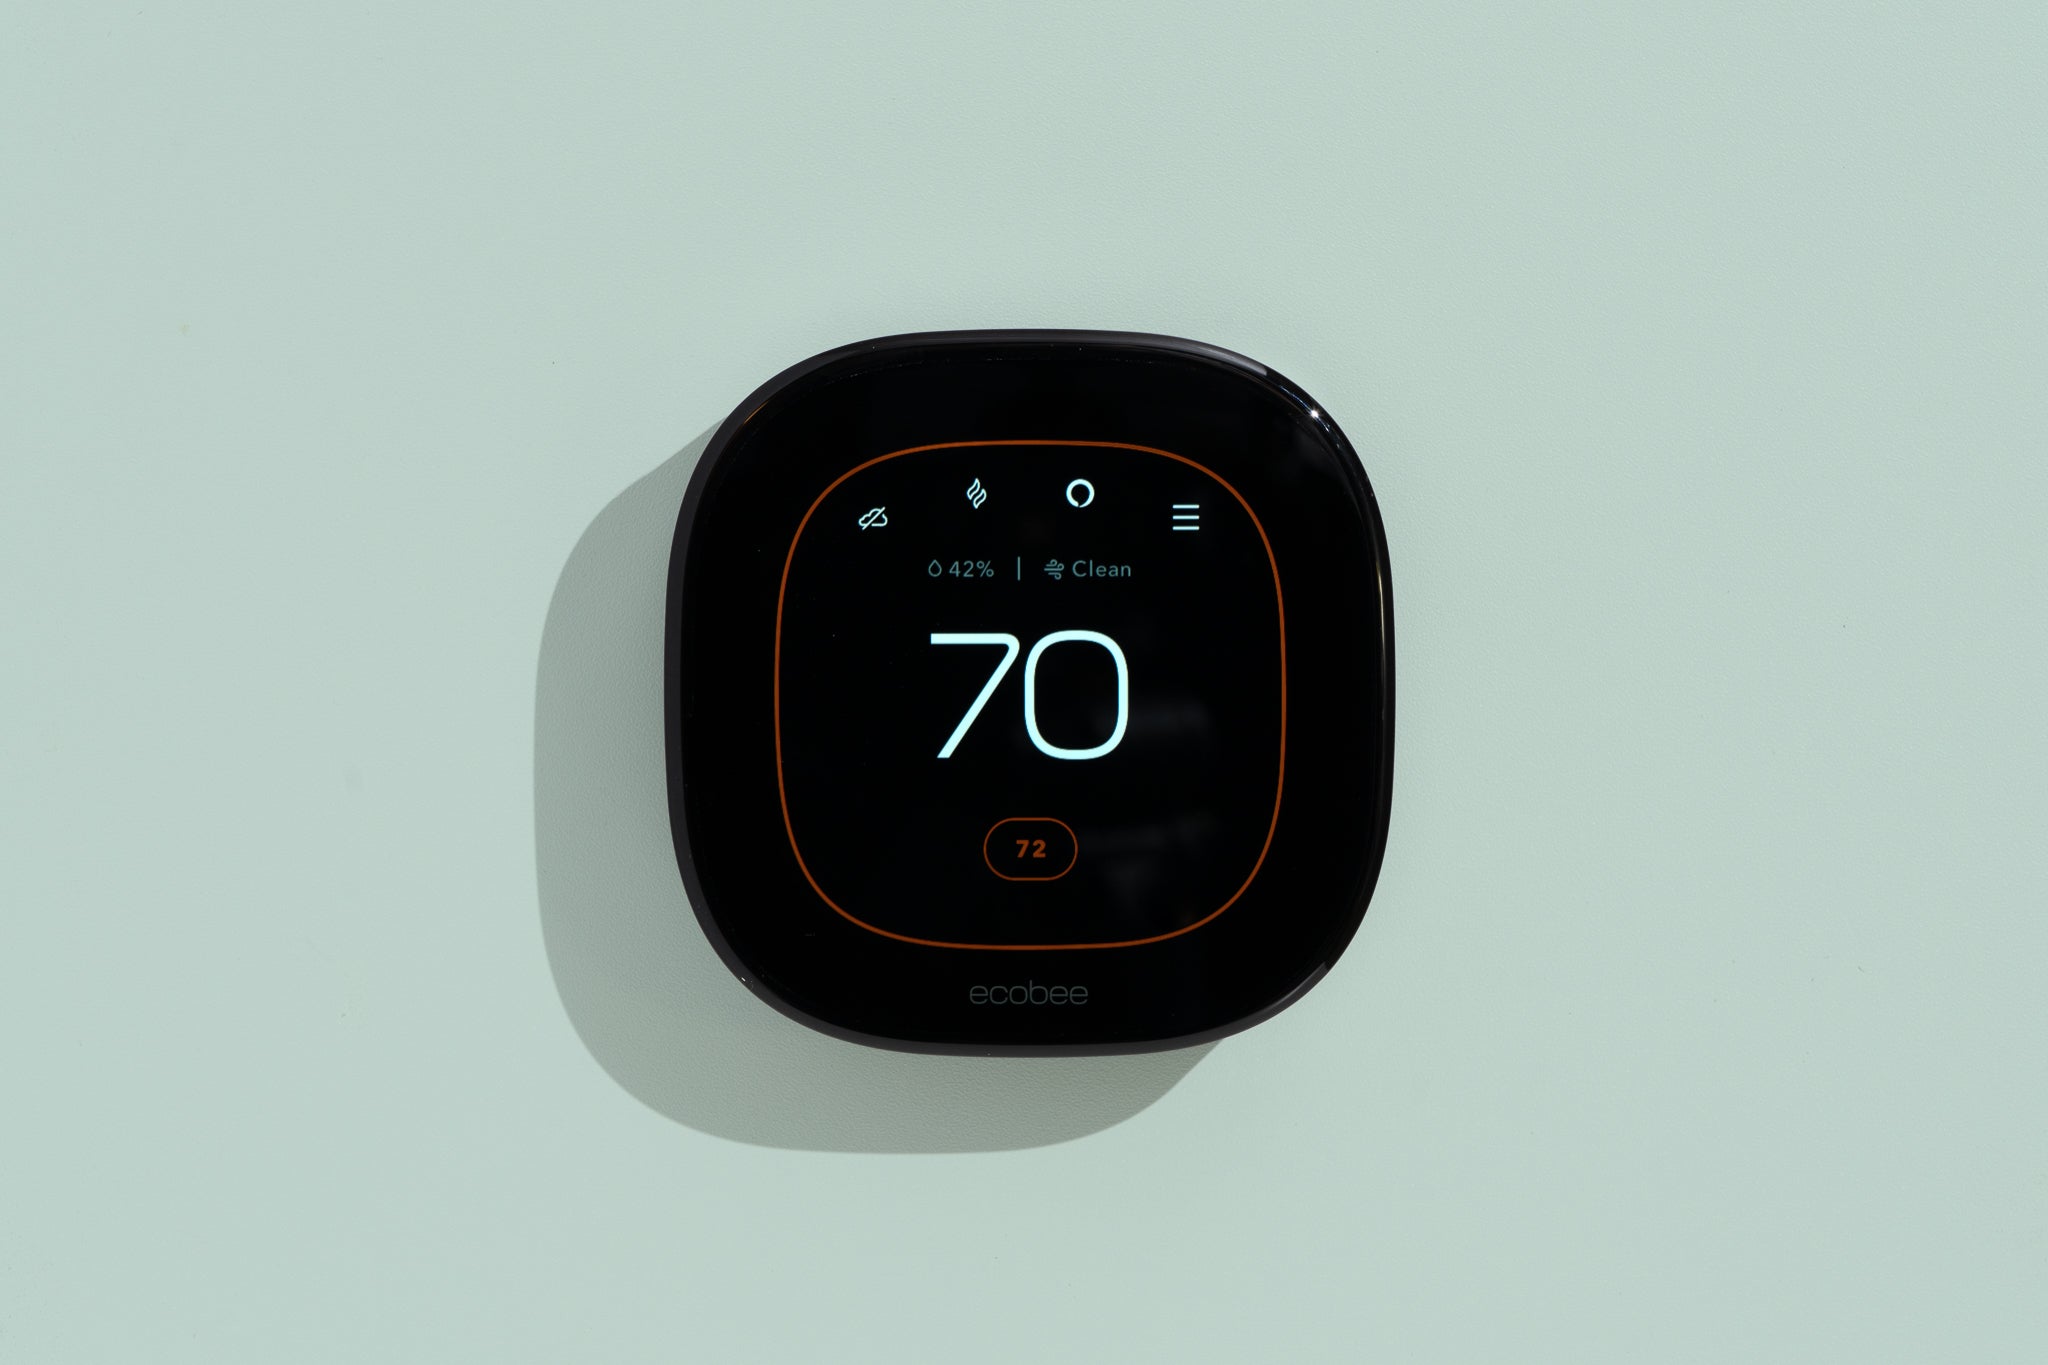 How To Unregister The Previous Owner Of A Honeywell Smart Thermostat